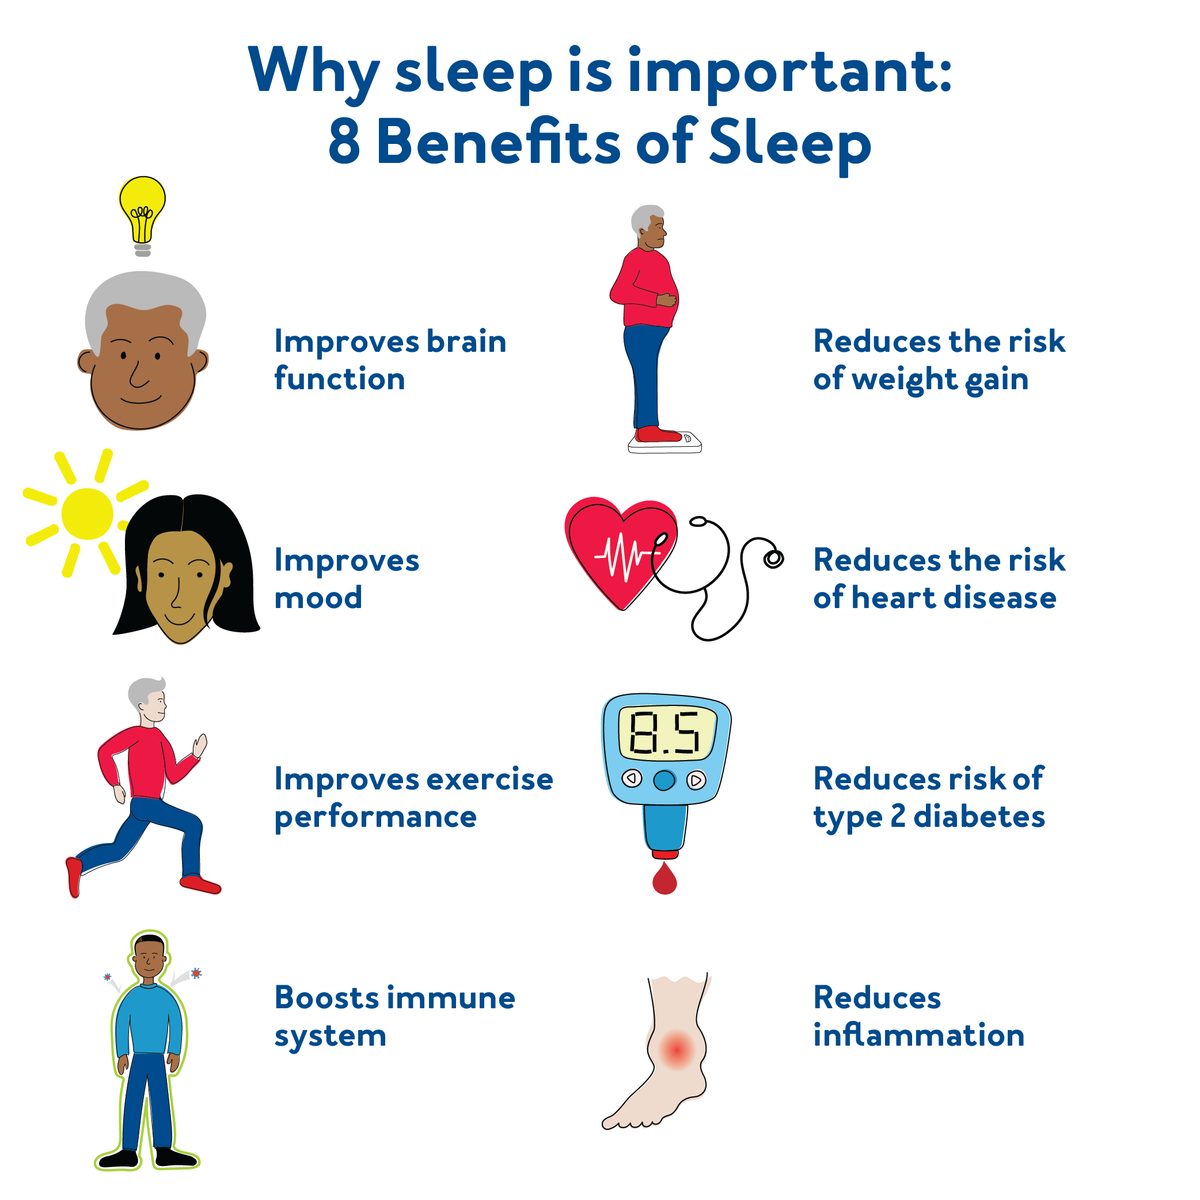 Why Sleep is Important: Eight Benefits of Sleep - Improves Brain Function, Improves Mood, Improves Exercise Performance, Boosts Immune System, Reduces the Risk of Weight Gain, Reduces the Risk of Heart Disease, Reduces the risk of Type 2 Diabetes, and Reduces Inflammation